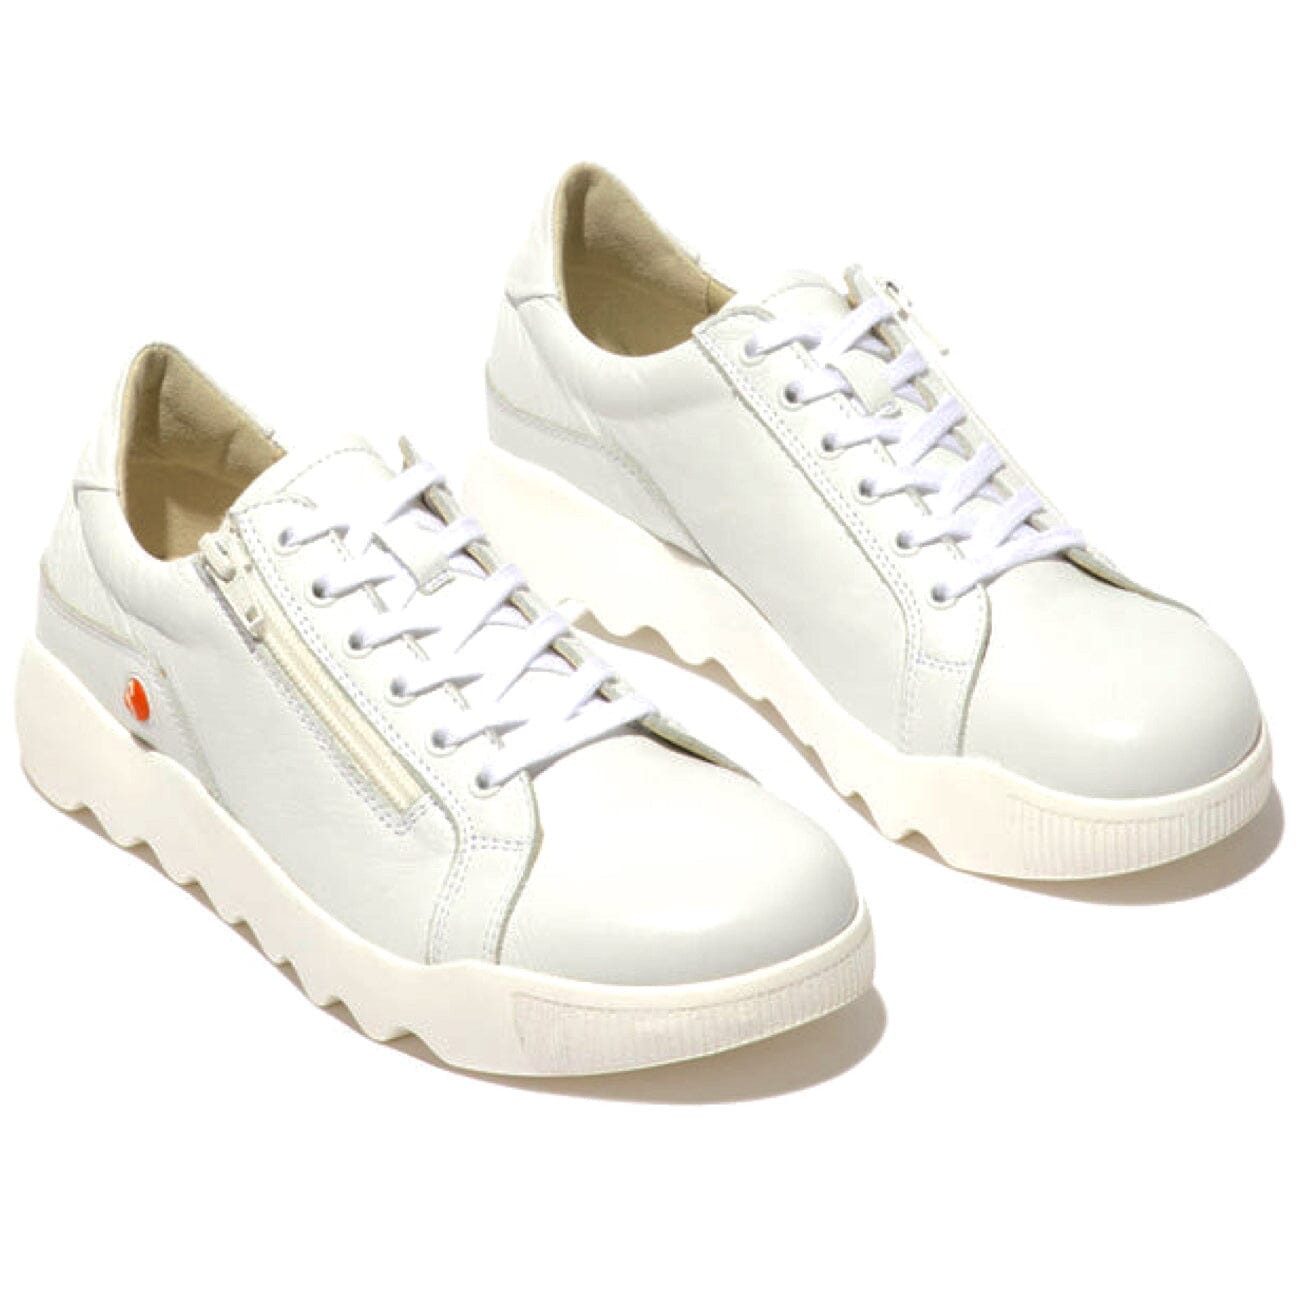 Softinos, Whiz719, Laceup Shoe, Smooth Leather, White Shoes Softinos White 36 